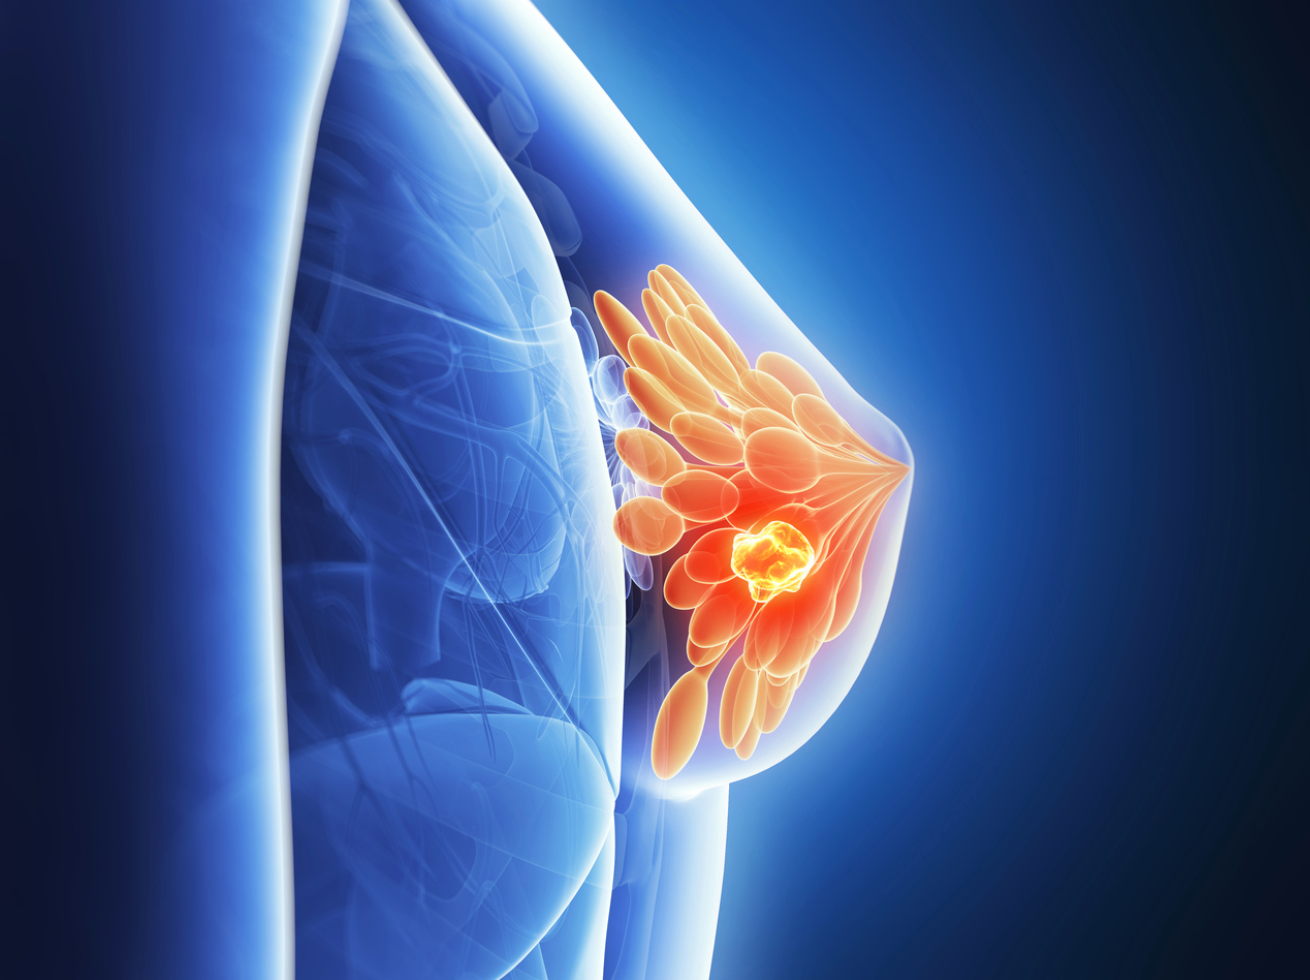 Overall Survival of Ibrance With Letrozole Numerically Longer Over Placebo for ER+, HER2- Metastatic Breast Cancer 